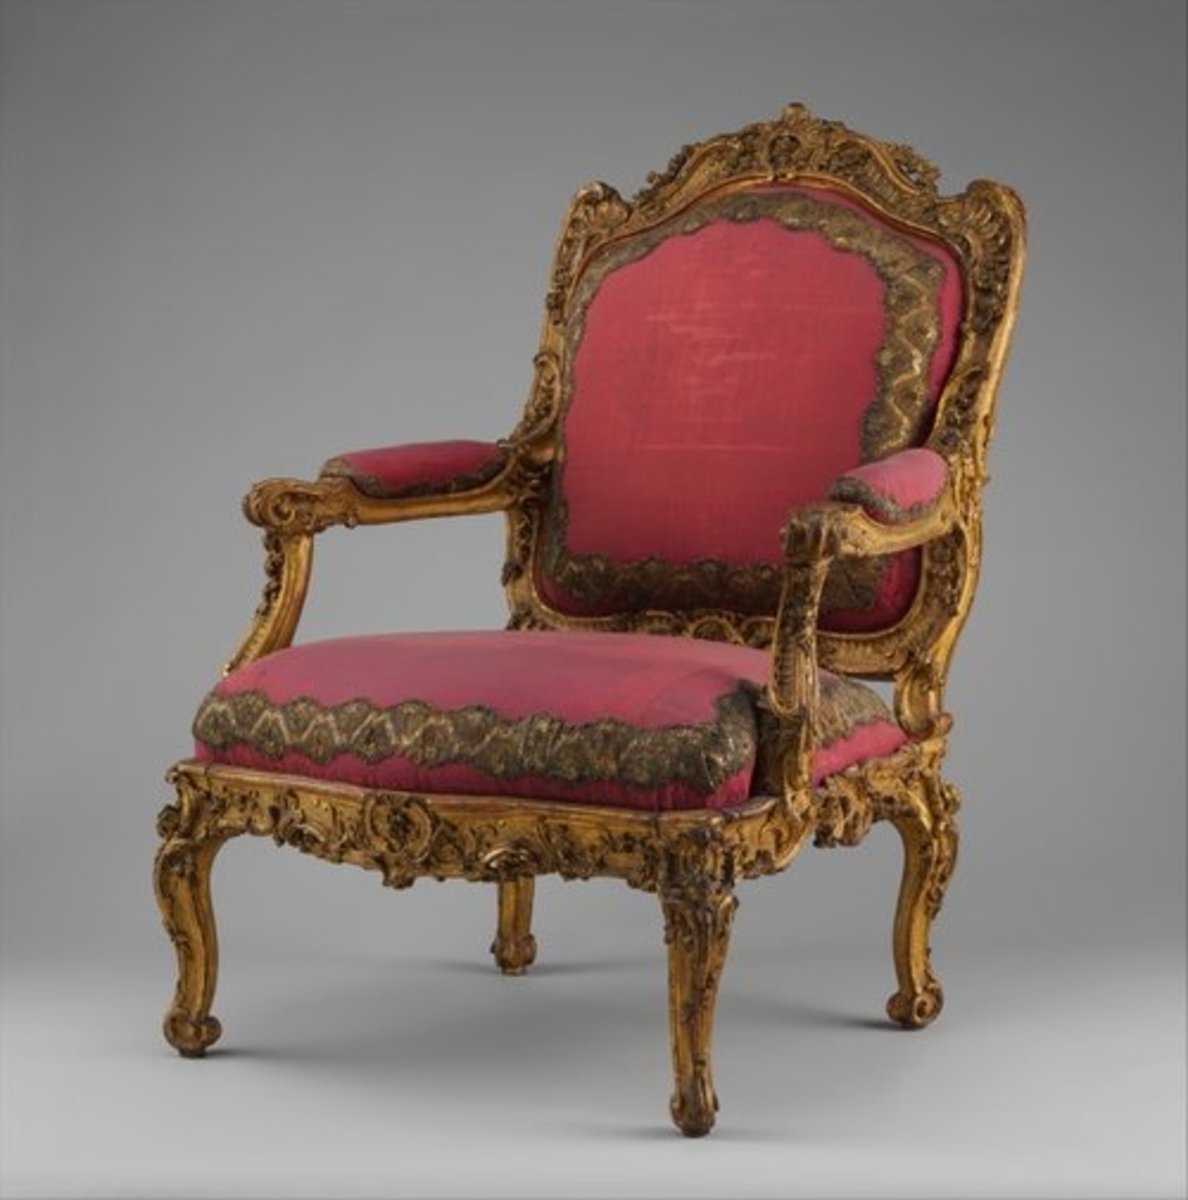 A Guide To Antique Chair Identification, Antique Arm Chairs